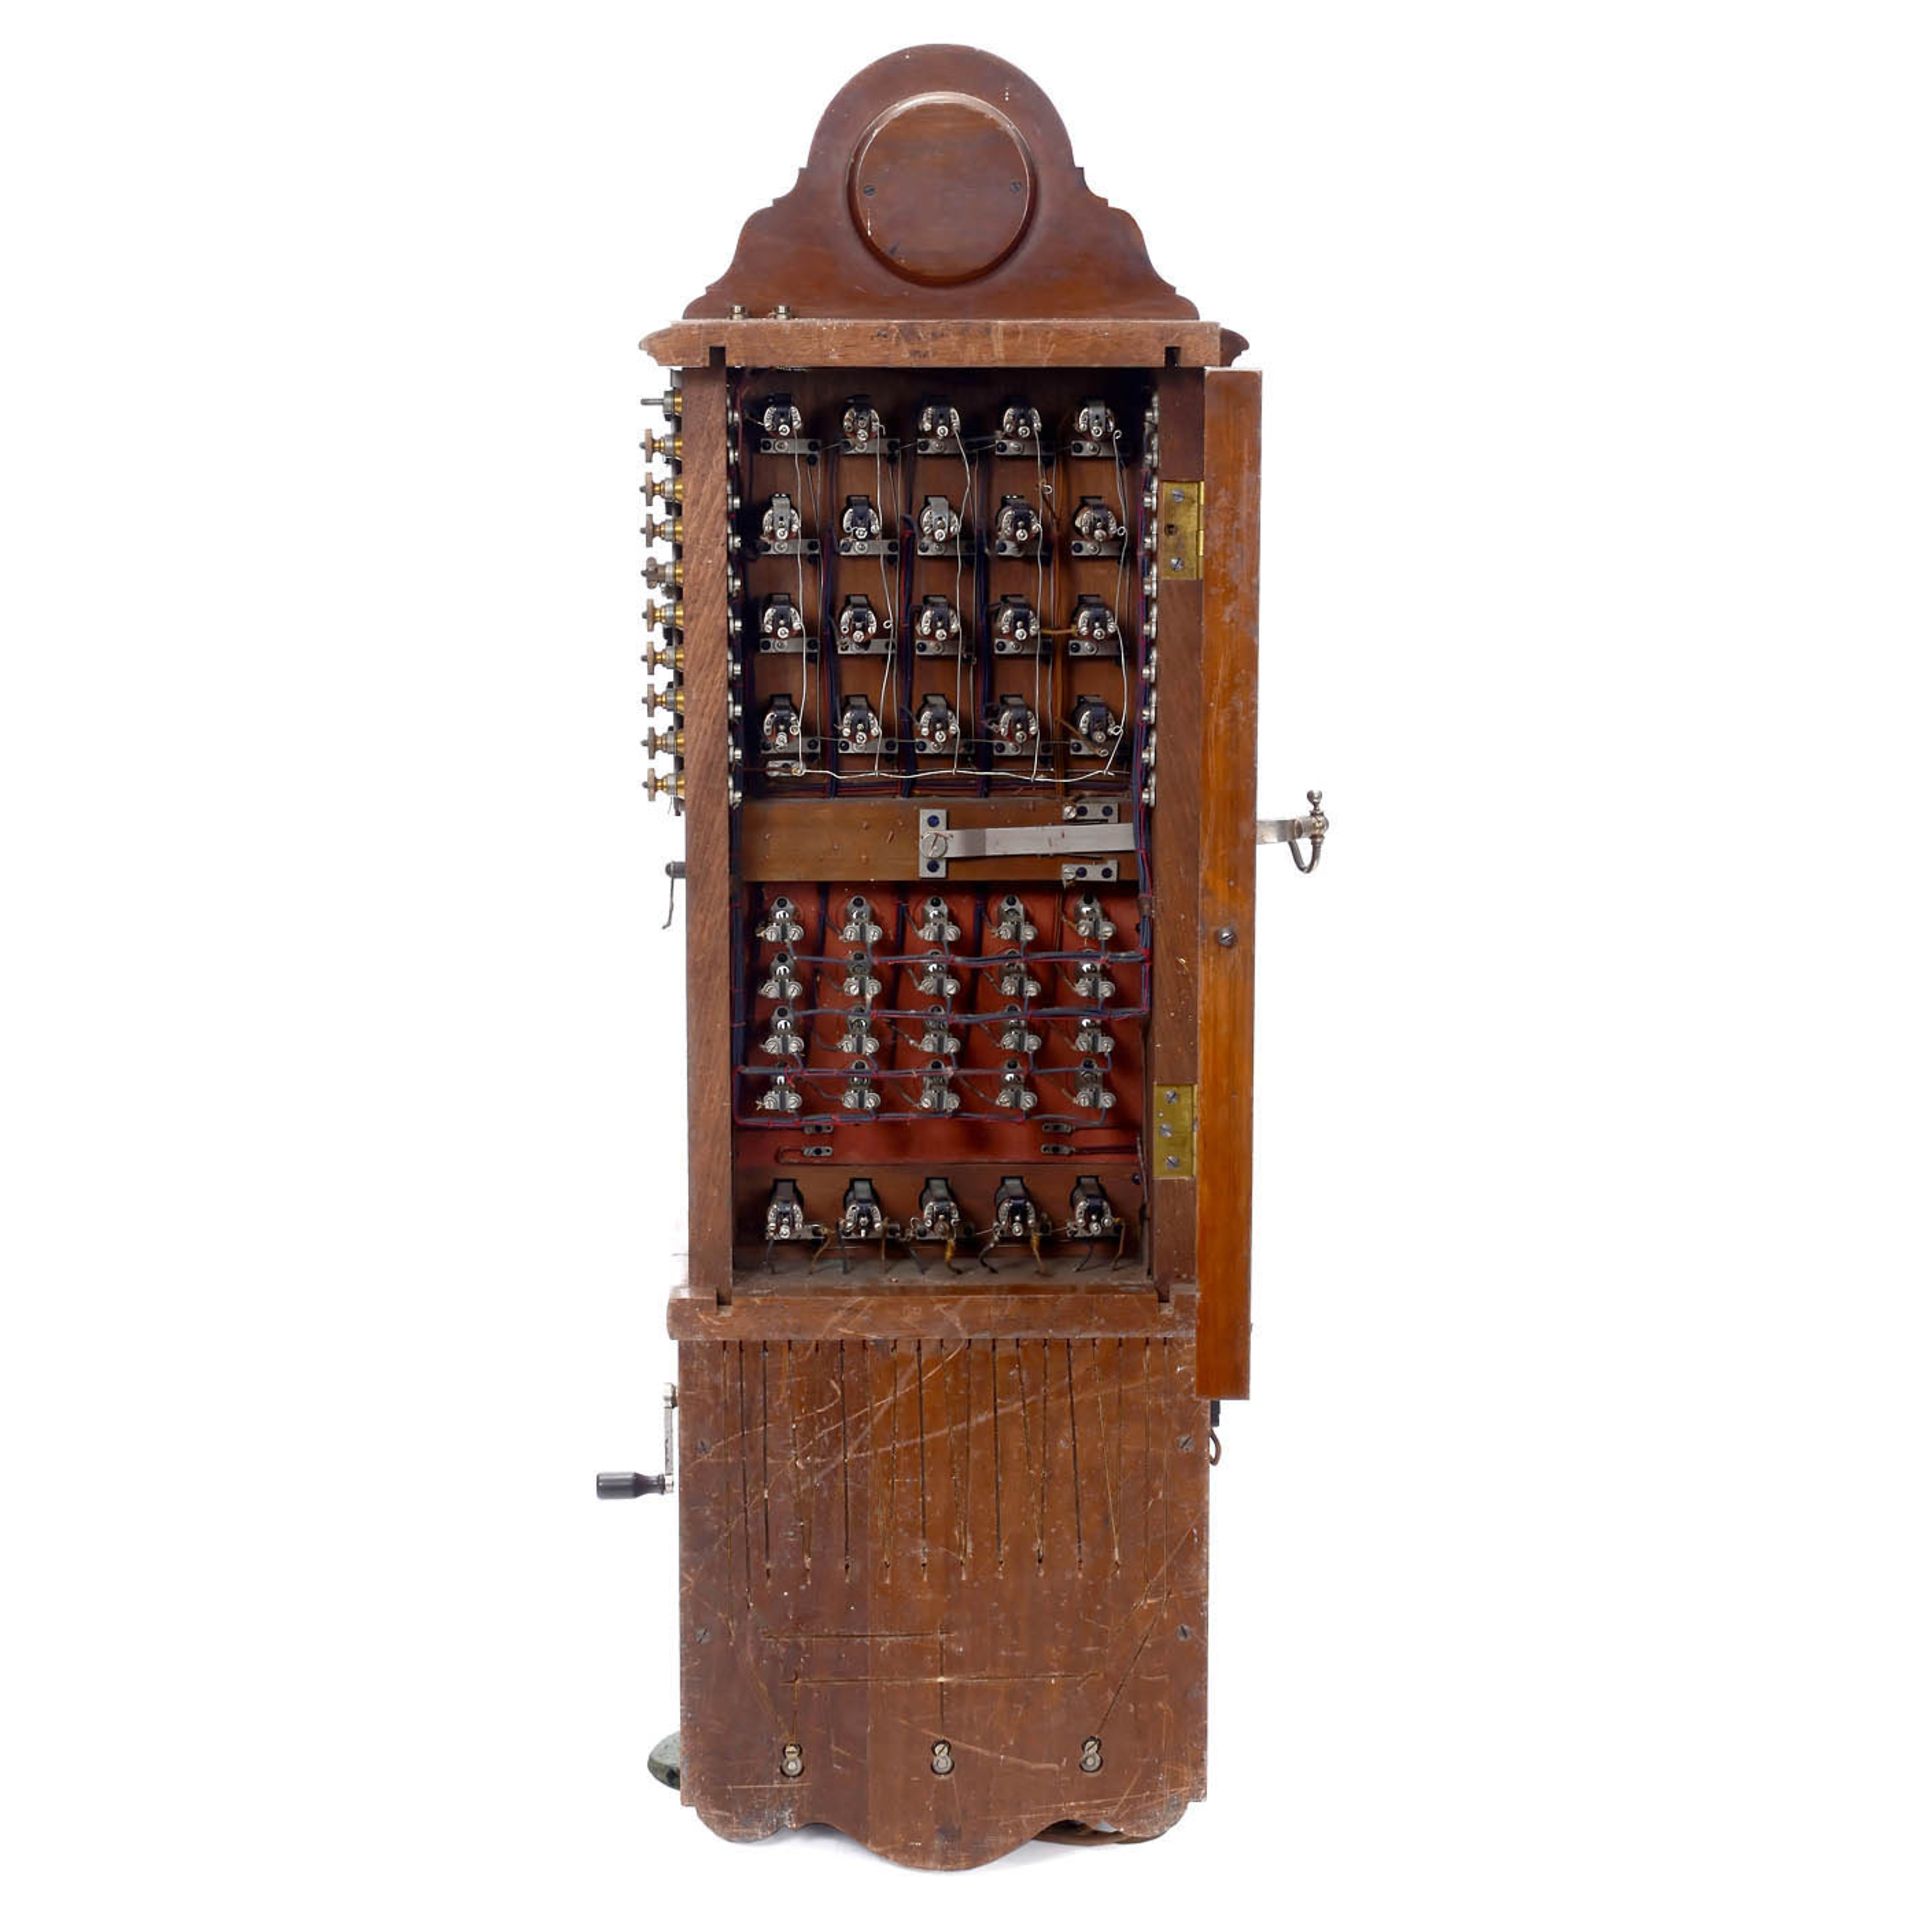 Large Switchboard by L.M. Ericsson, c. 1890 - Image 3 of 3